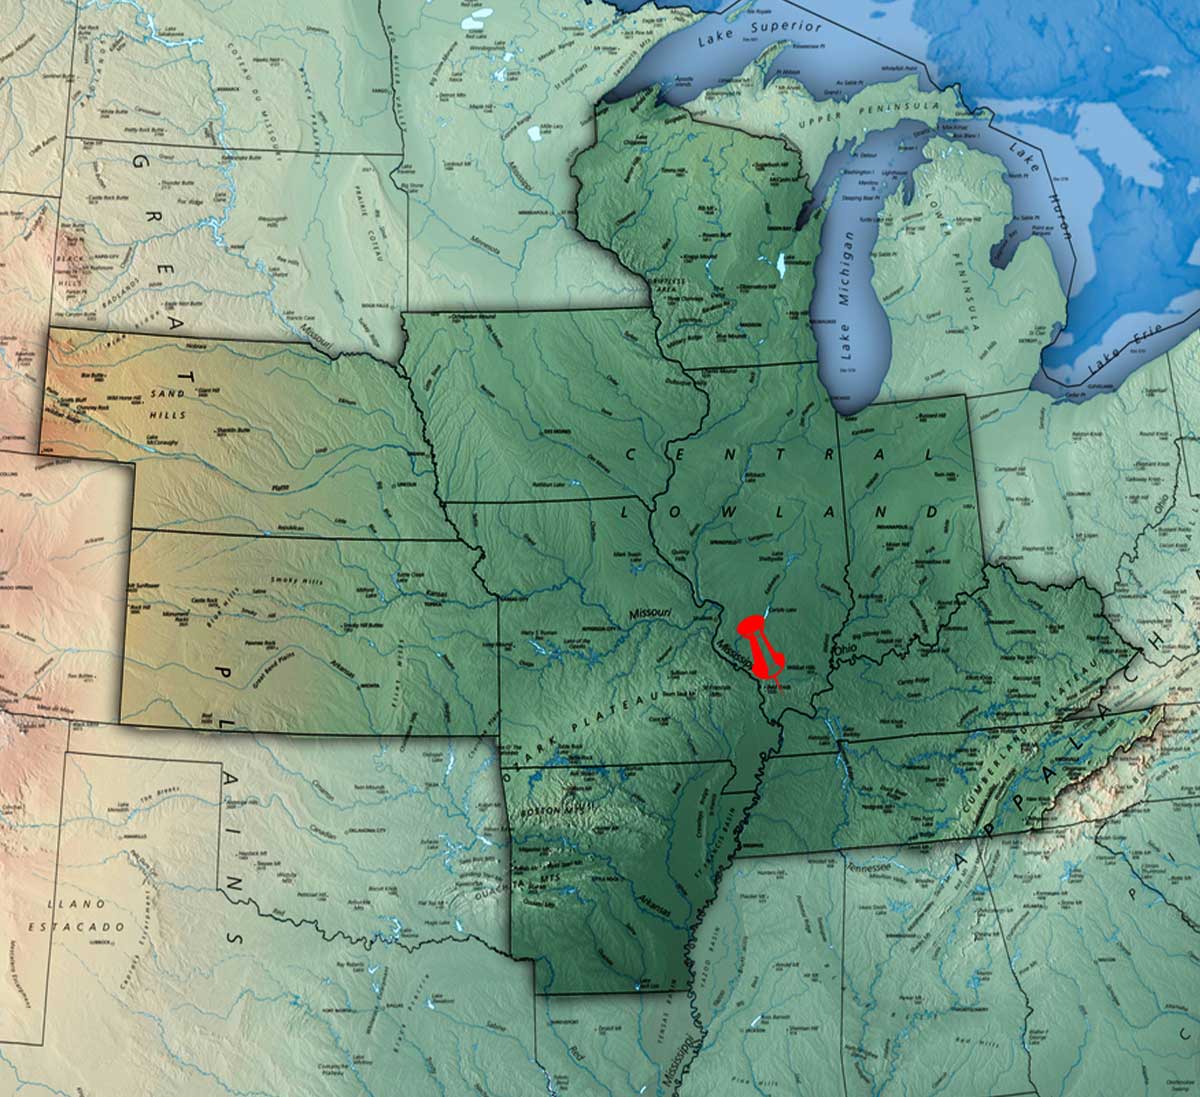 midwest states map - cultural resources management services firm in the midwest